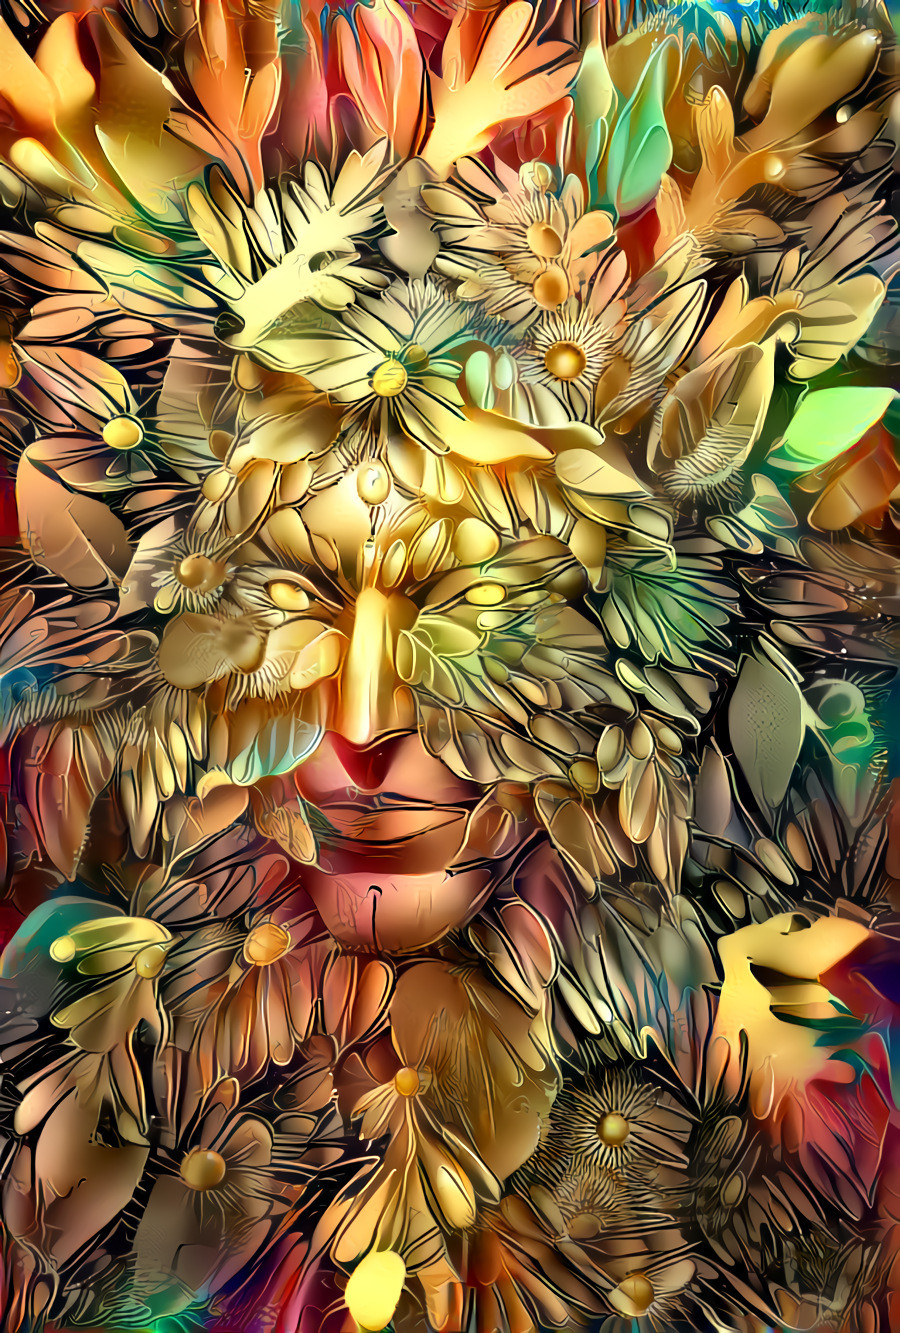 The Greenman in Color [1.2MP]